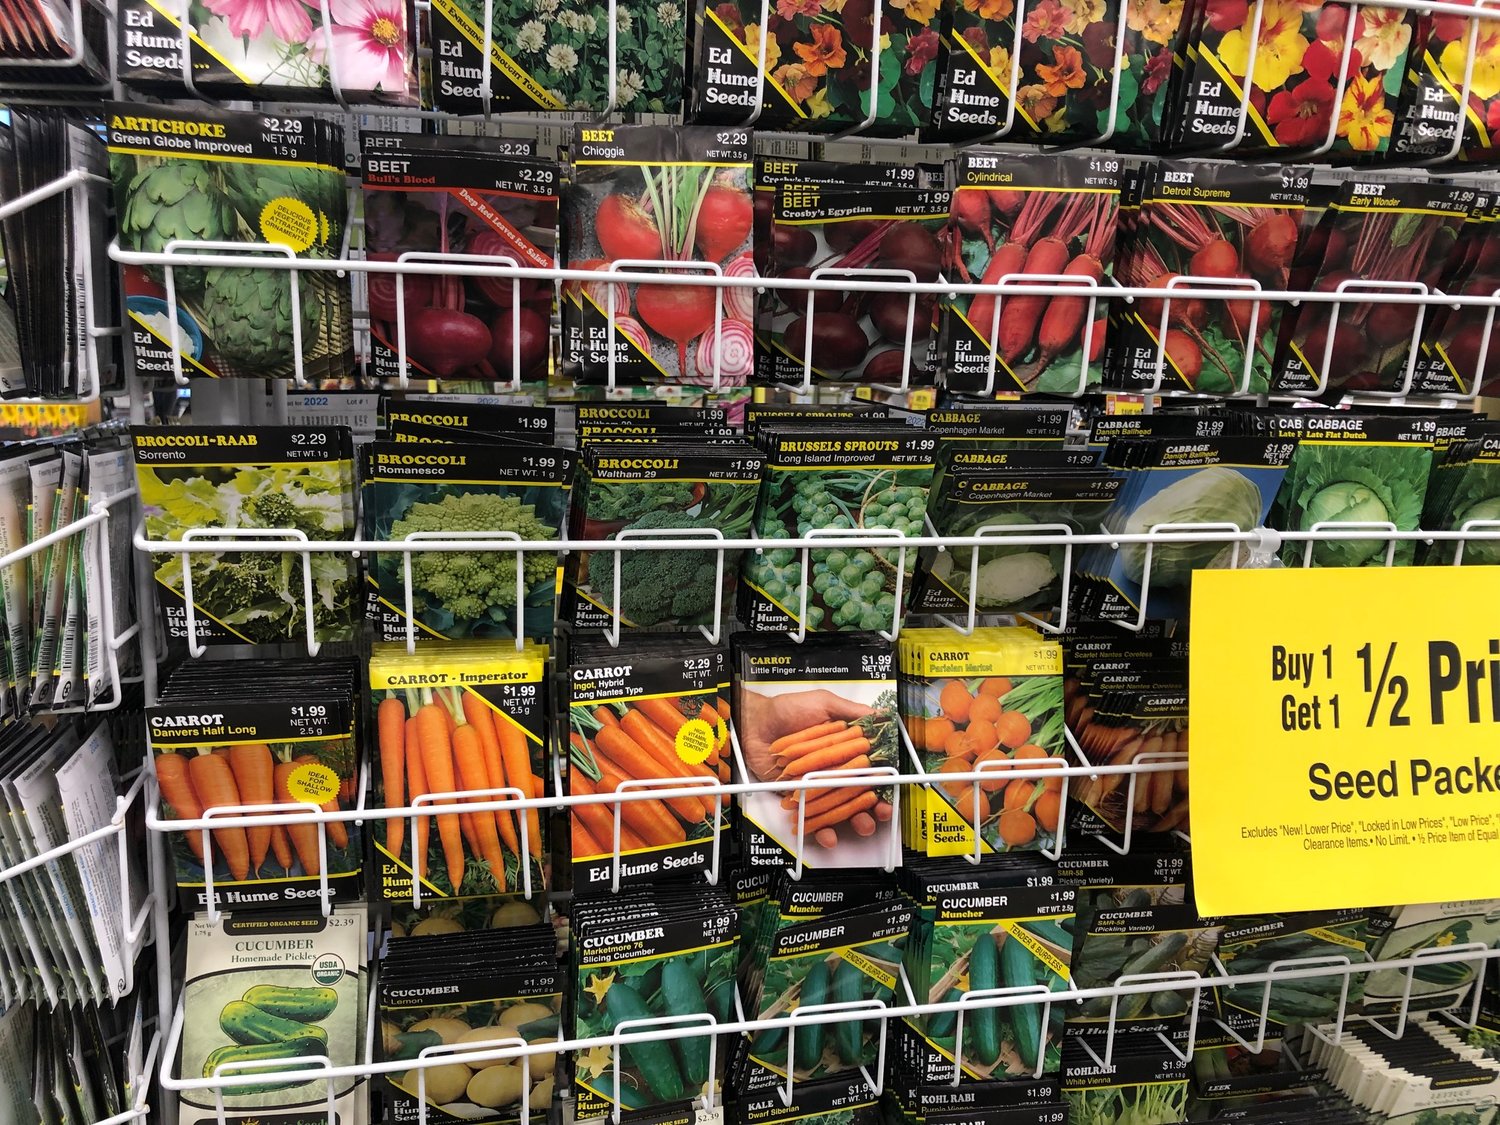 Several brands of vegetable seeds are on sale at Fred Meyer in Lacey and can be purchased using SNAP.